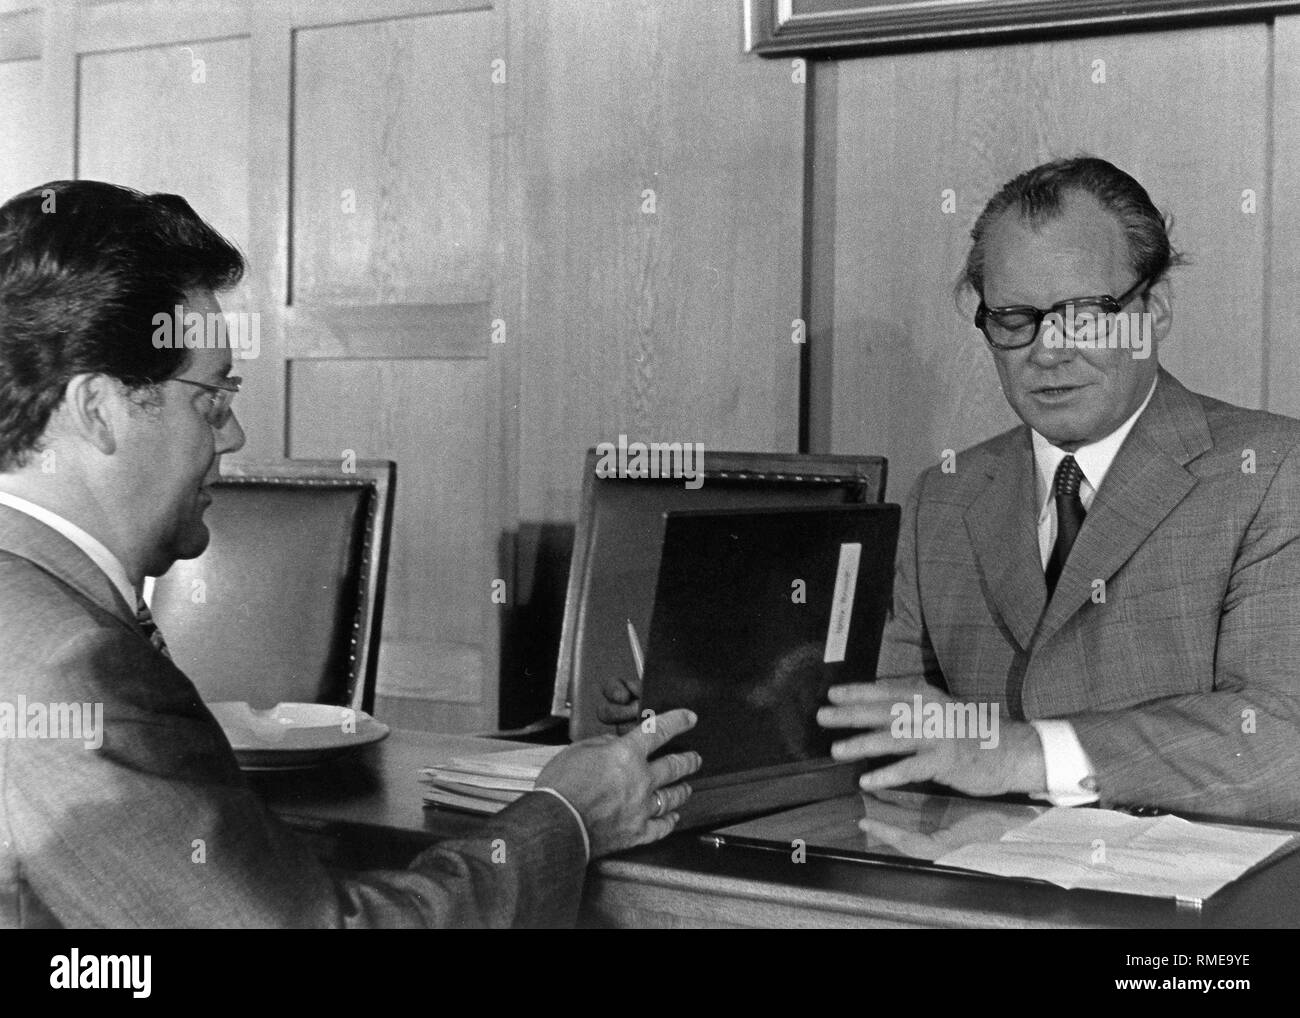 The East German spy Guenter Guillaume presents to Chancellor Willy Brandt a file with documents to be signed, at the beginning of a meeting of the Presidium of the SPD in the City Hall Schoeneberg in Berlin, about a year before his exposure as a GDR spy. Stock Photo